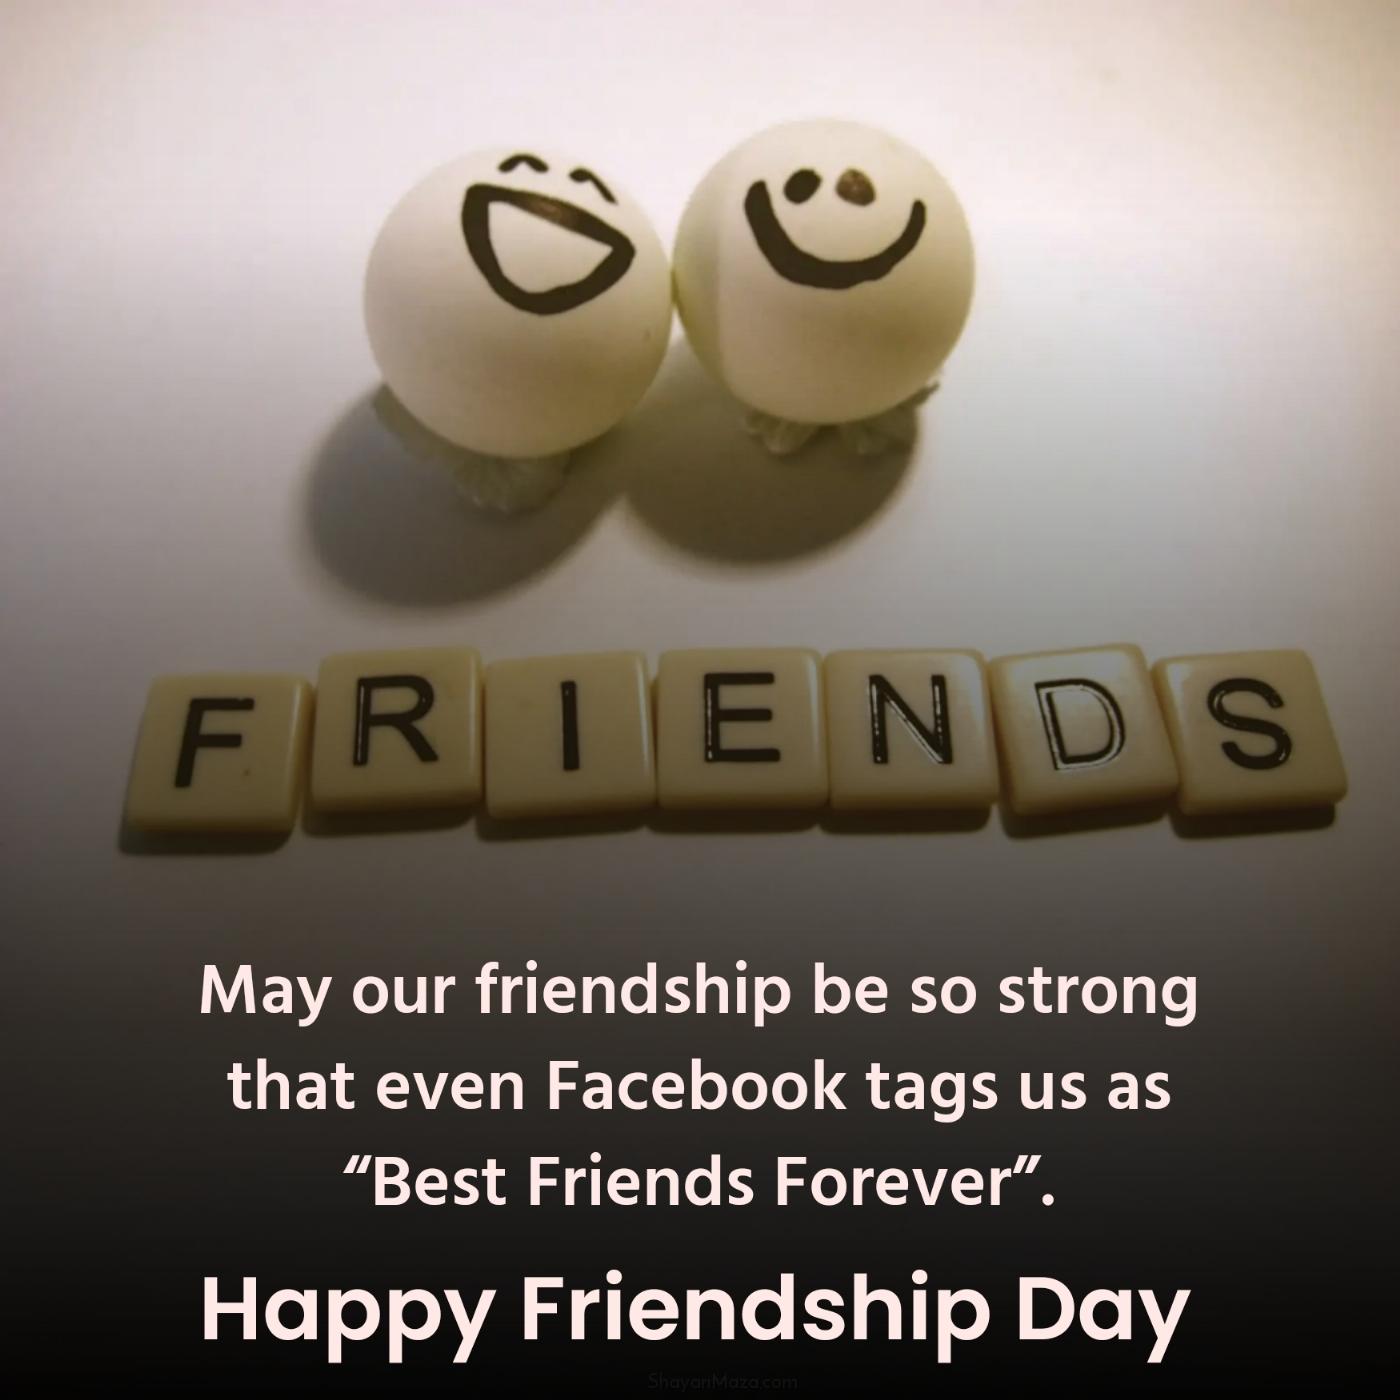 May our friendship be so strong that even Facebook tags us